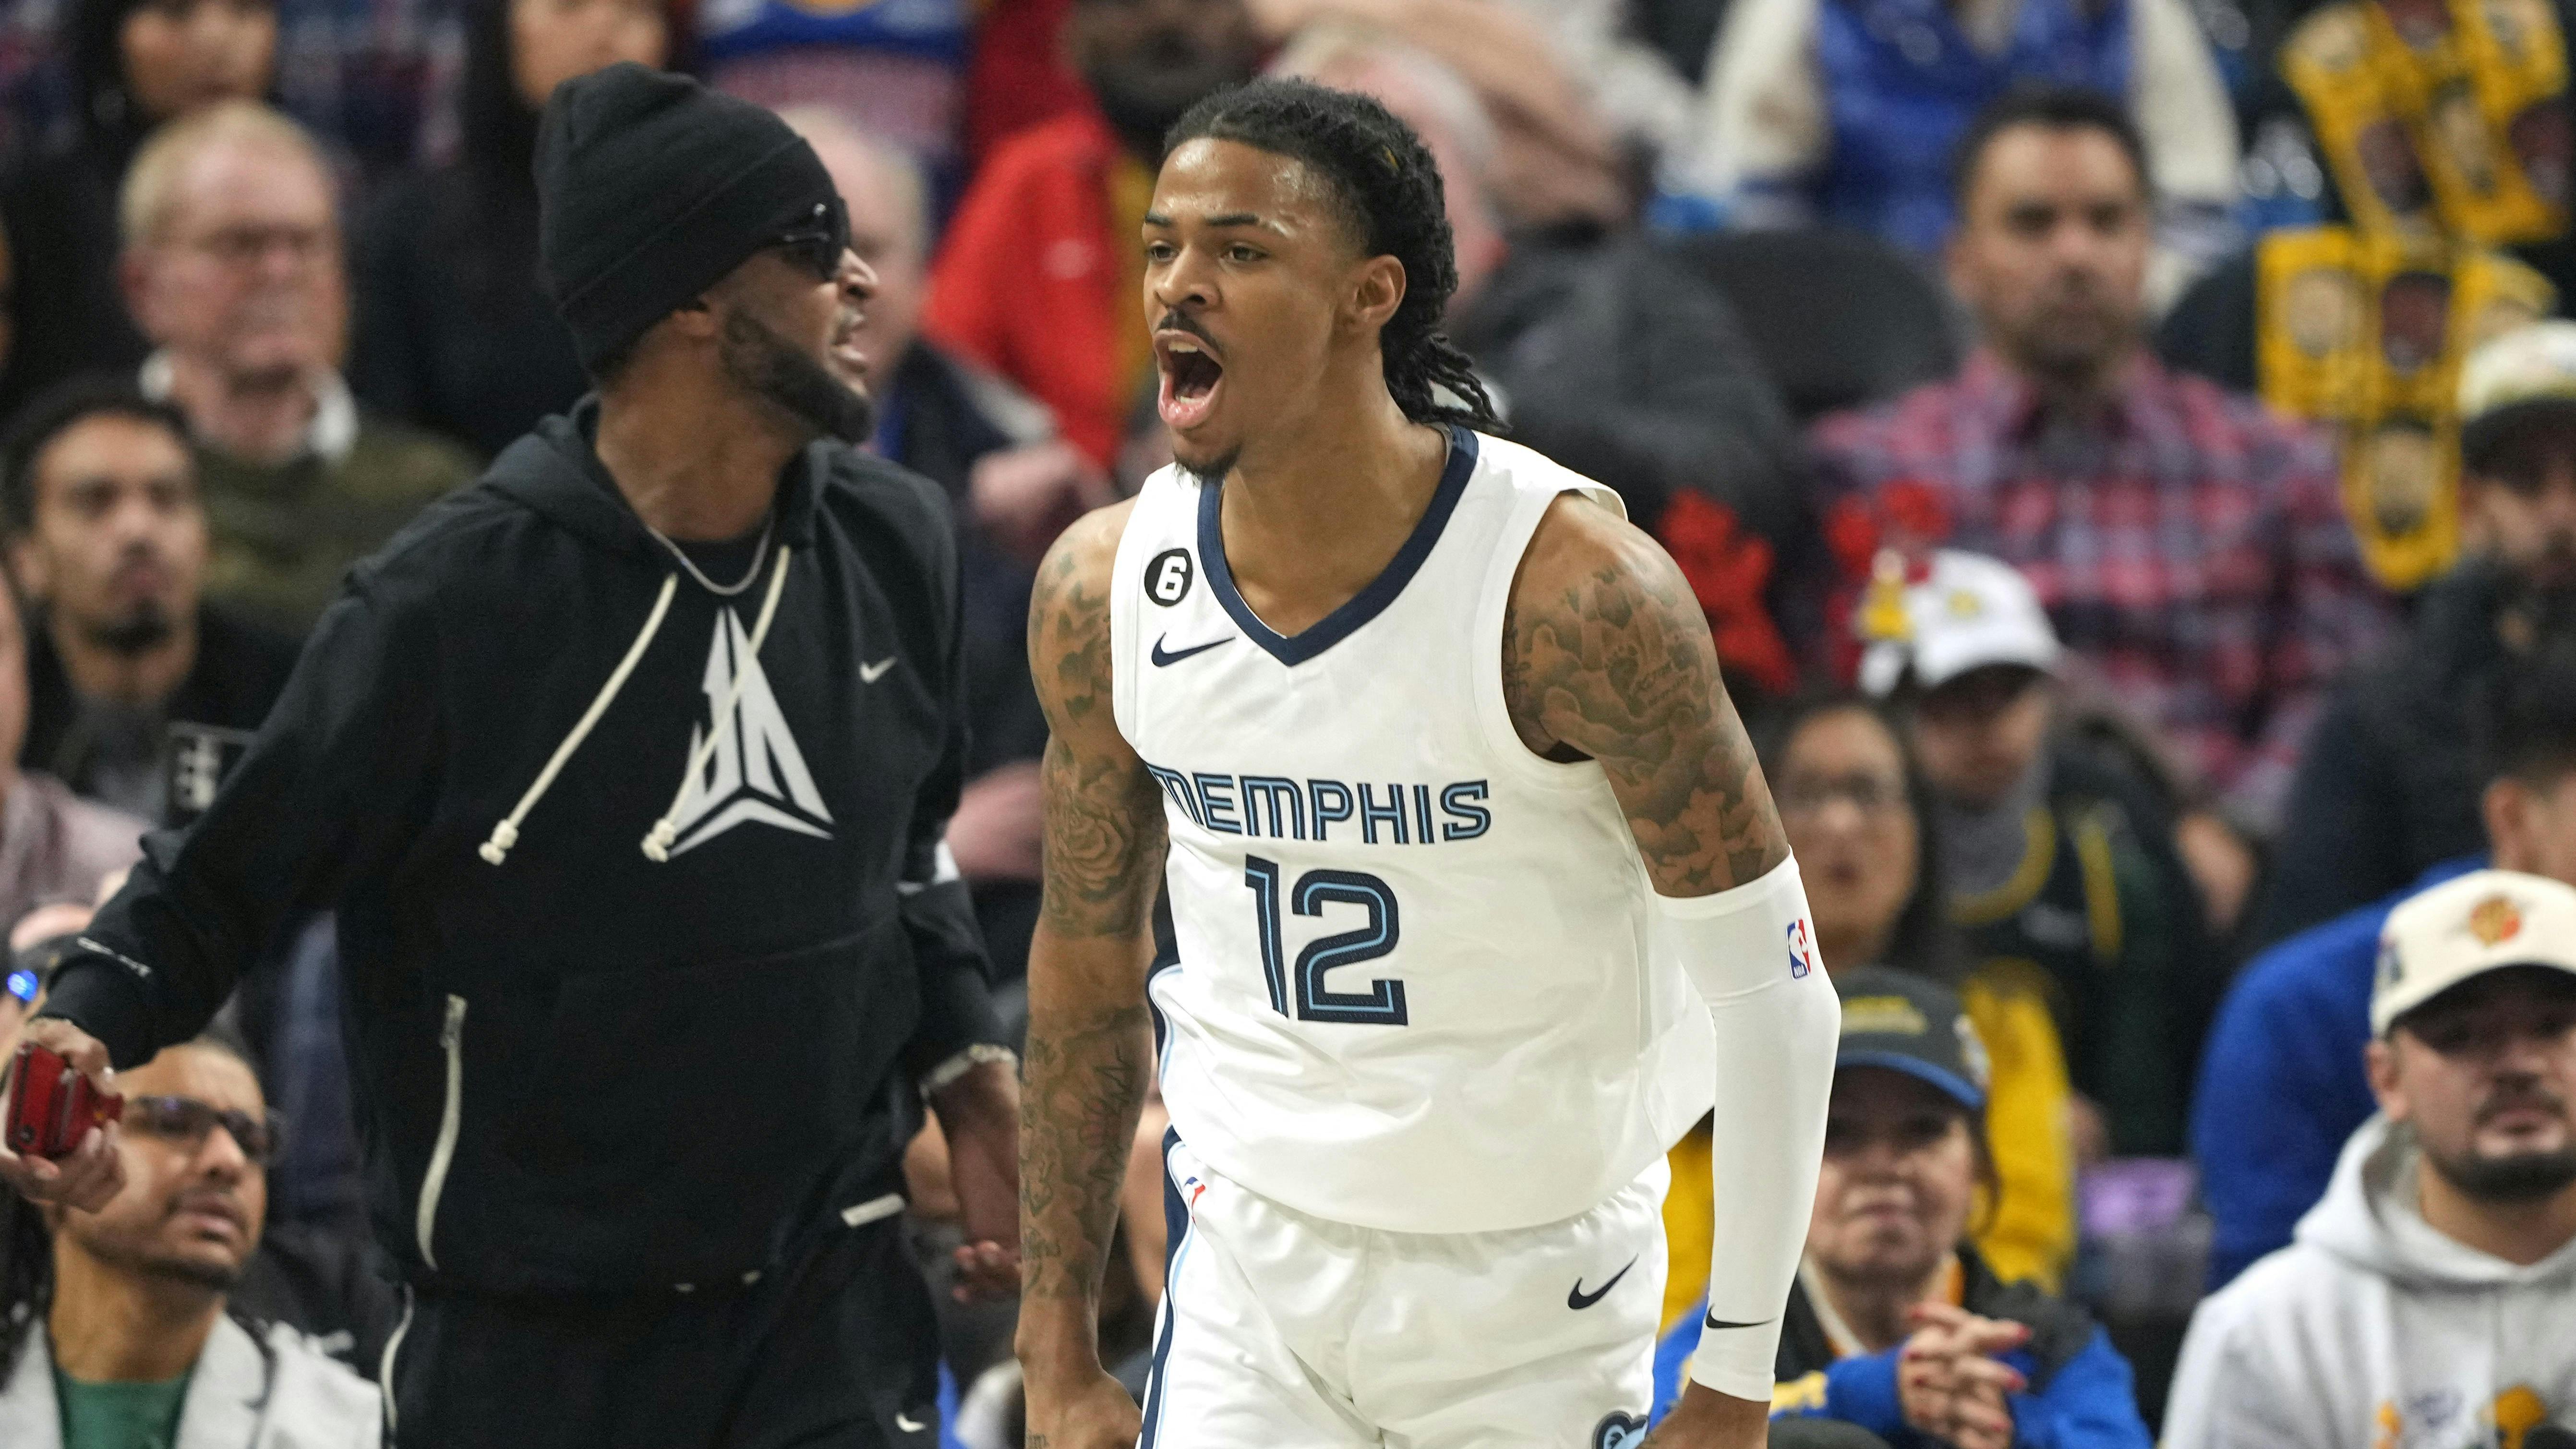 Sports world reacts to Ja Morant's NBA Dunk of the Year and insane